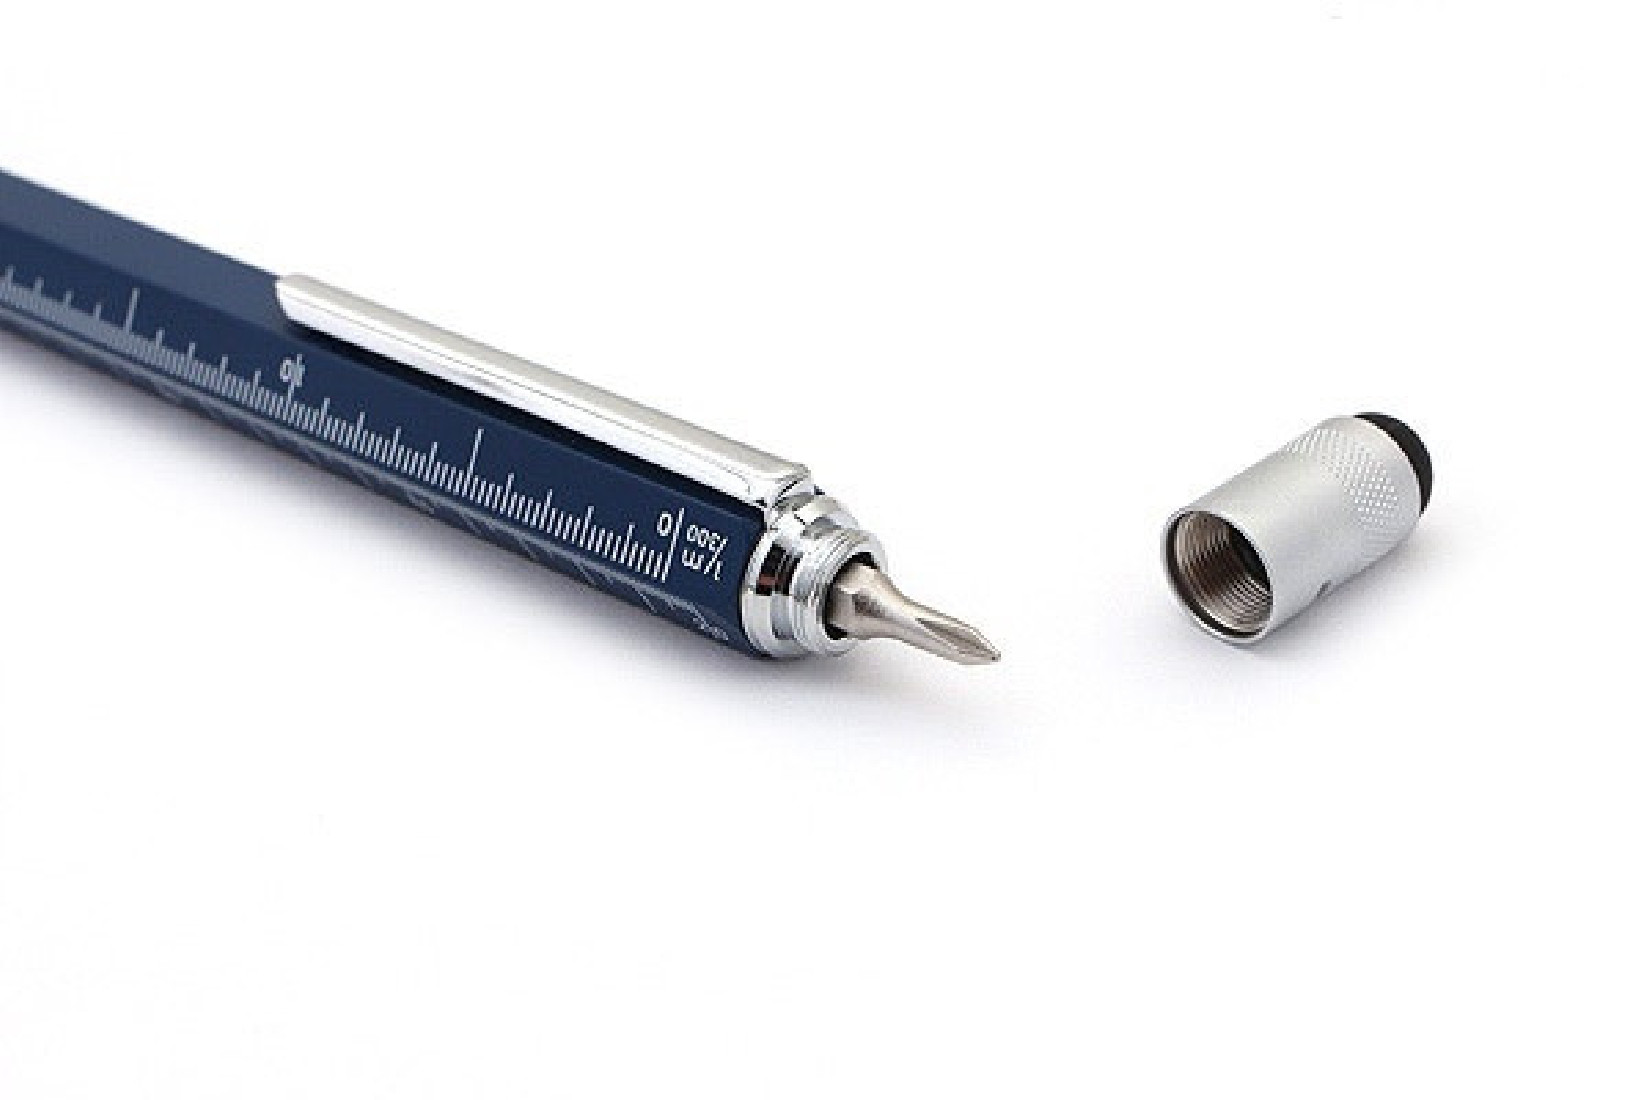 ONE TOUCH STYLUS 9 FUNCTION TOOL PENCIL NAVY BLUE MONTEVERDE